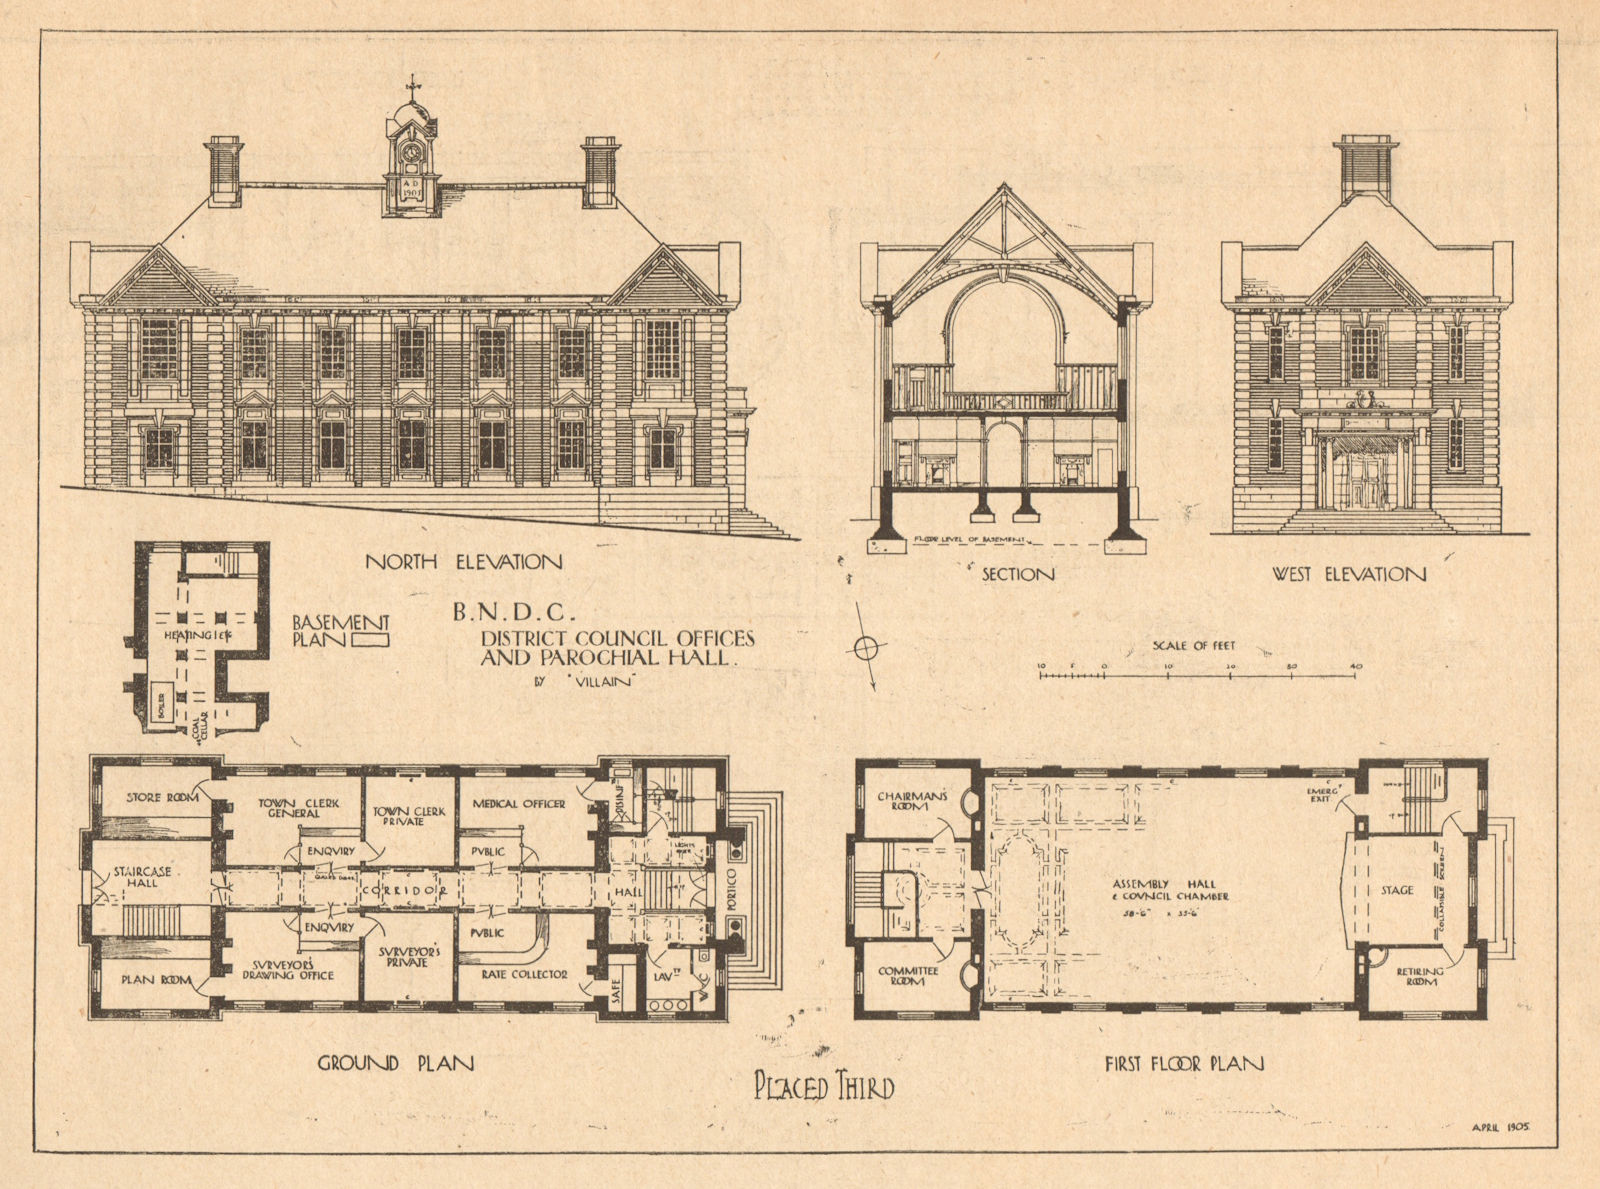 Associate Product District council offices & parochial hall by Villain. View elevation plan 1905